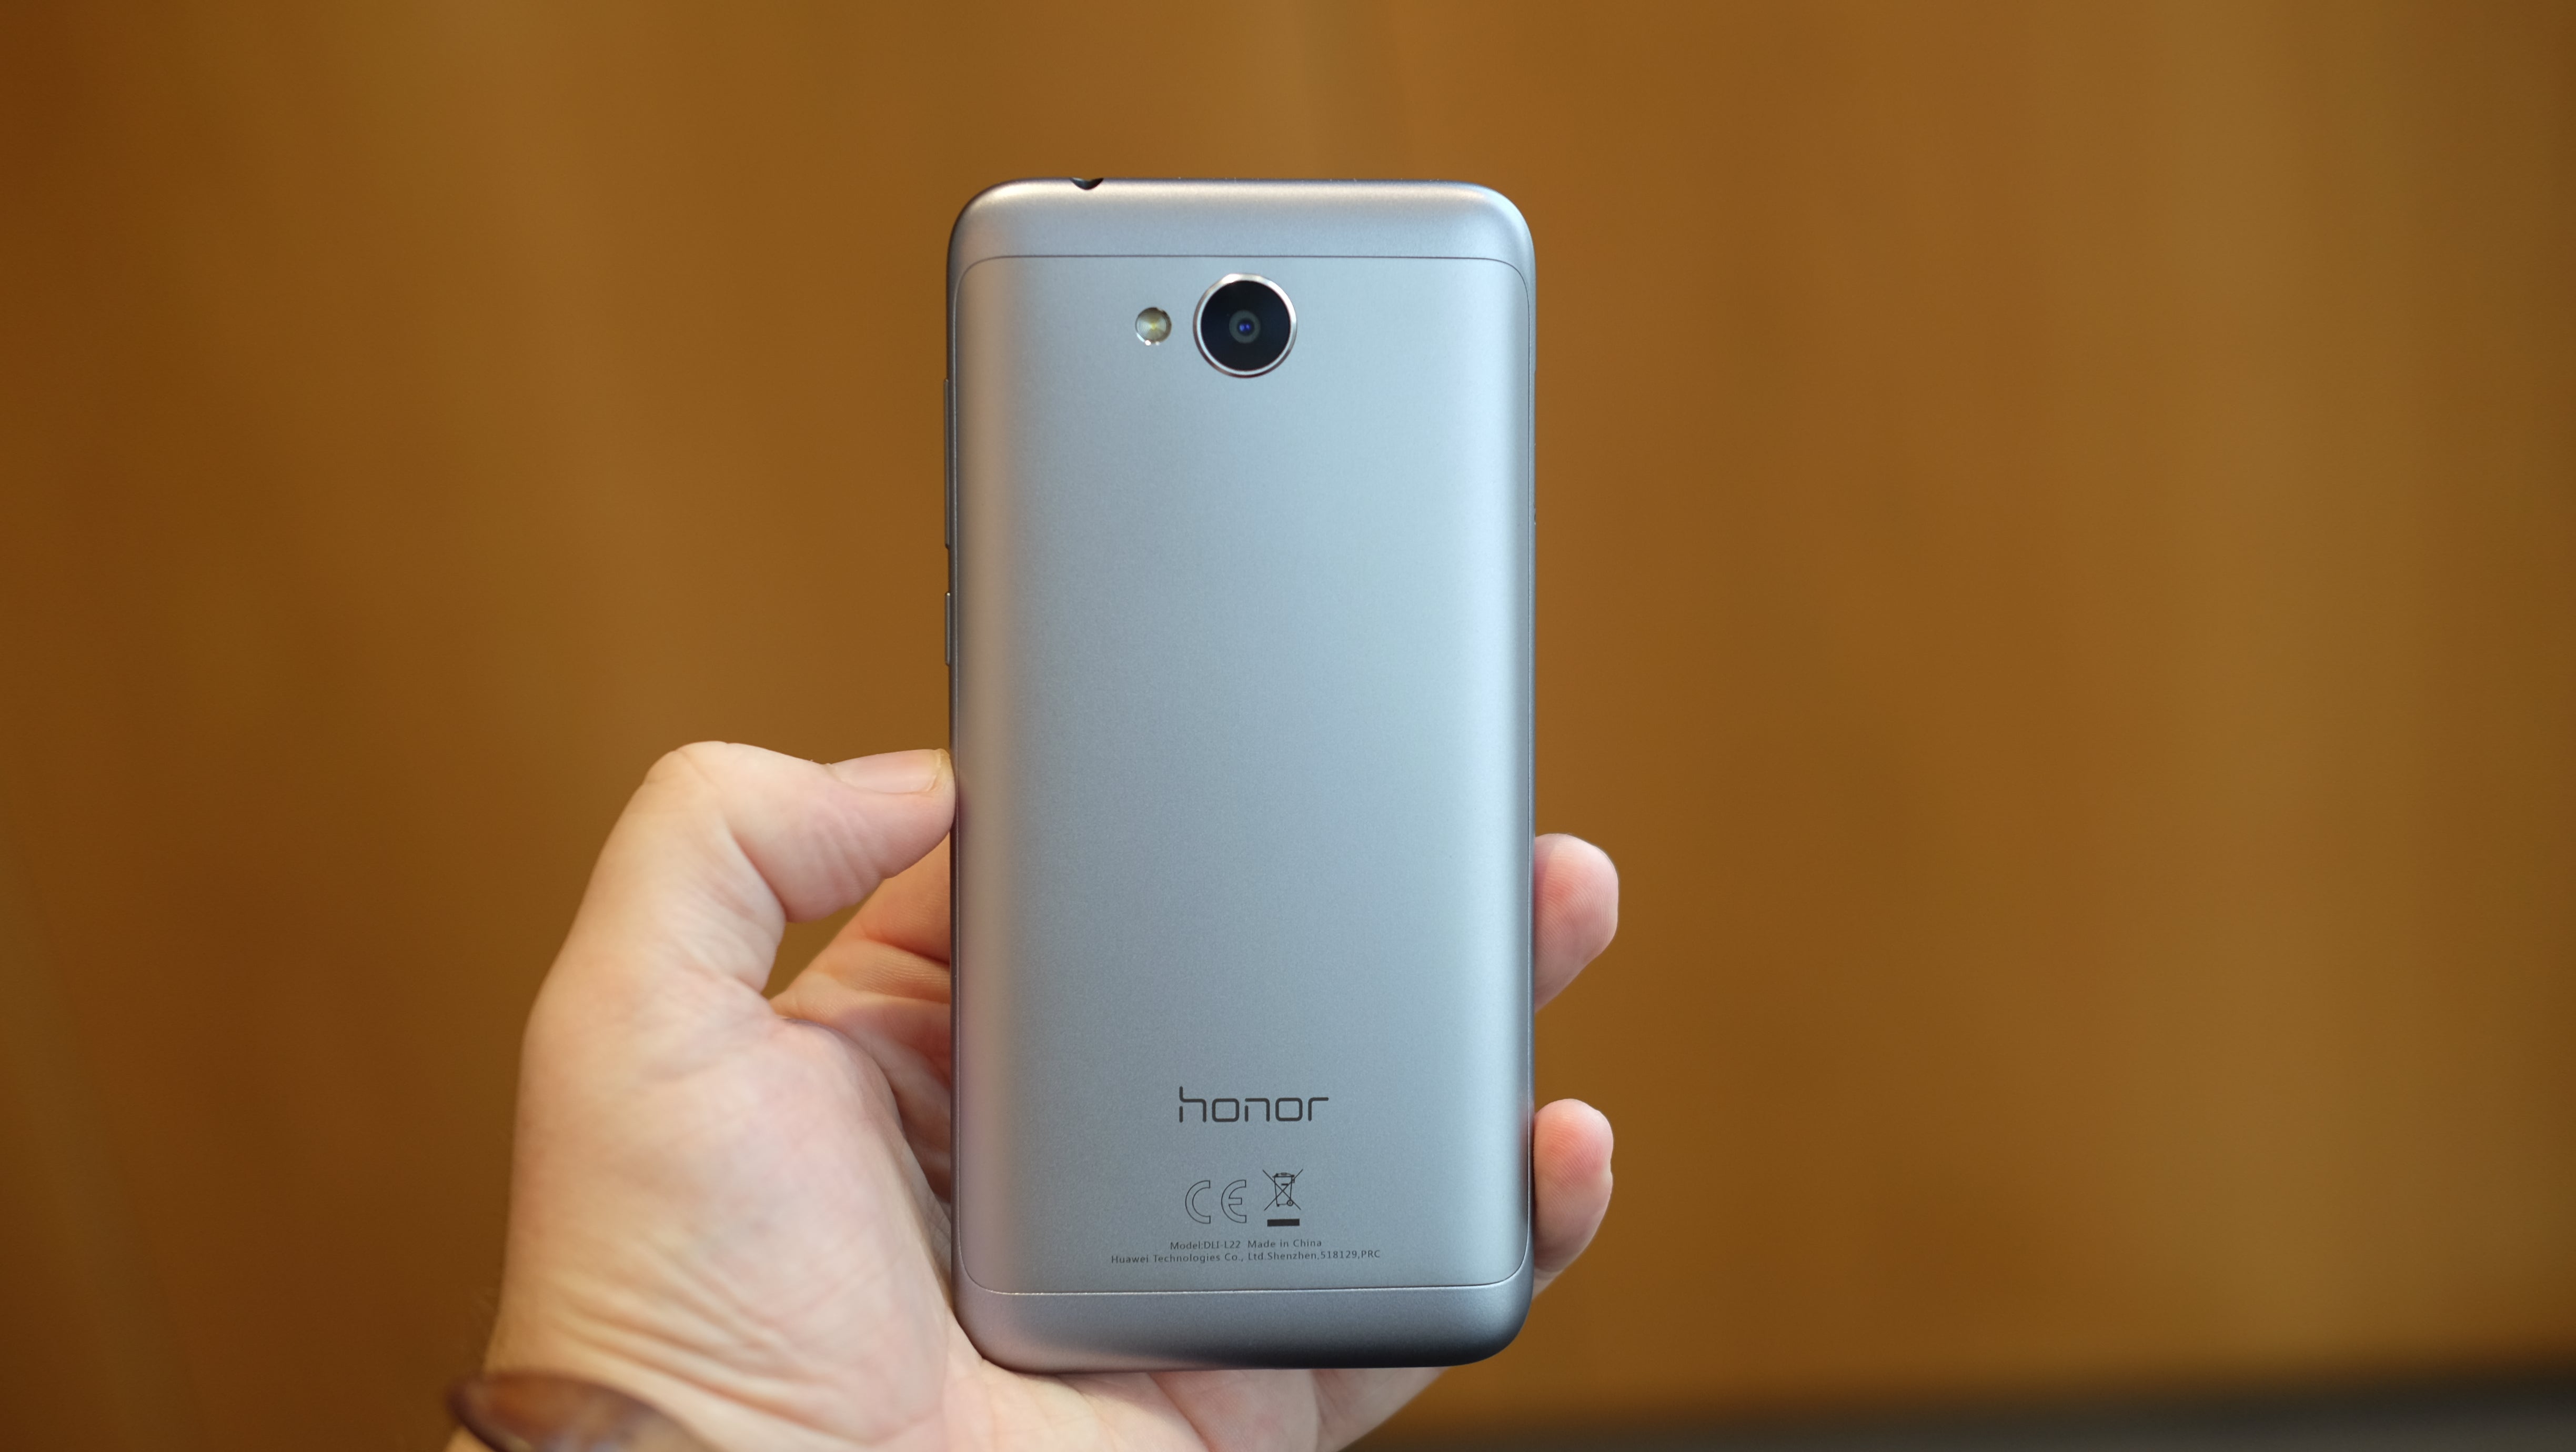 Hand holding Honor 6A smartphone showing rear view.